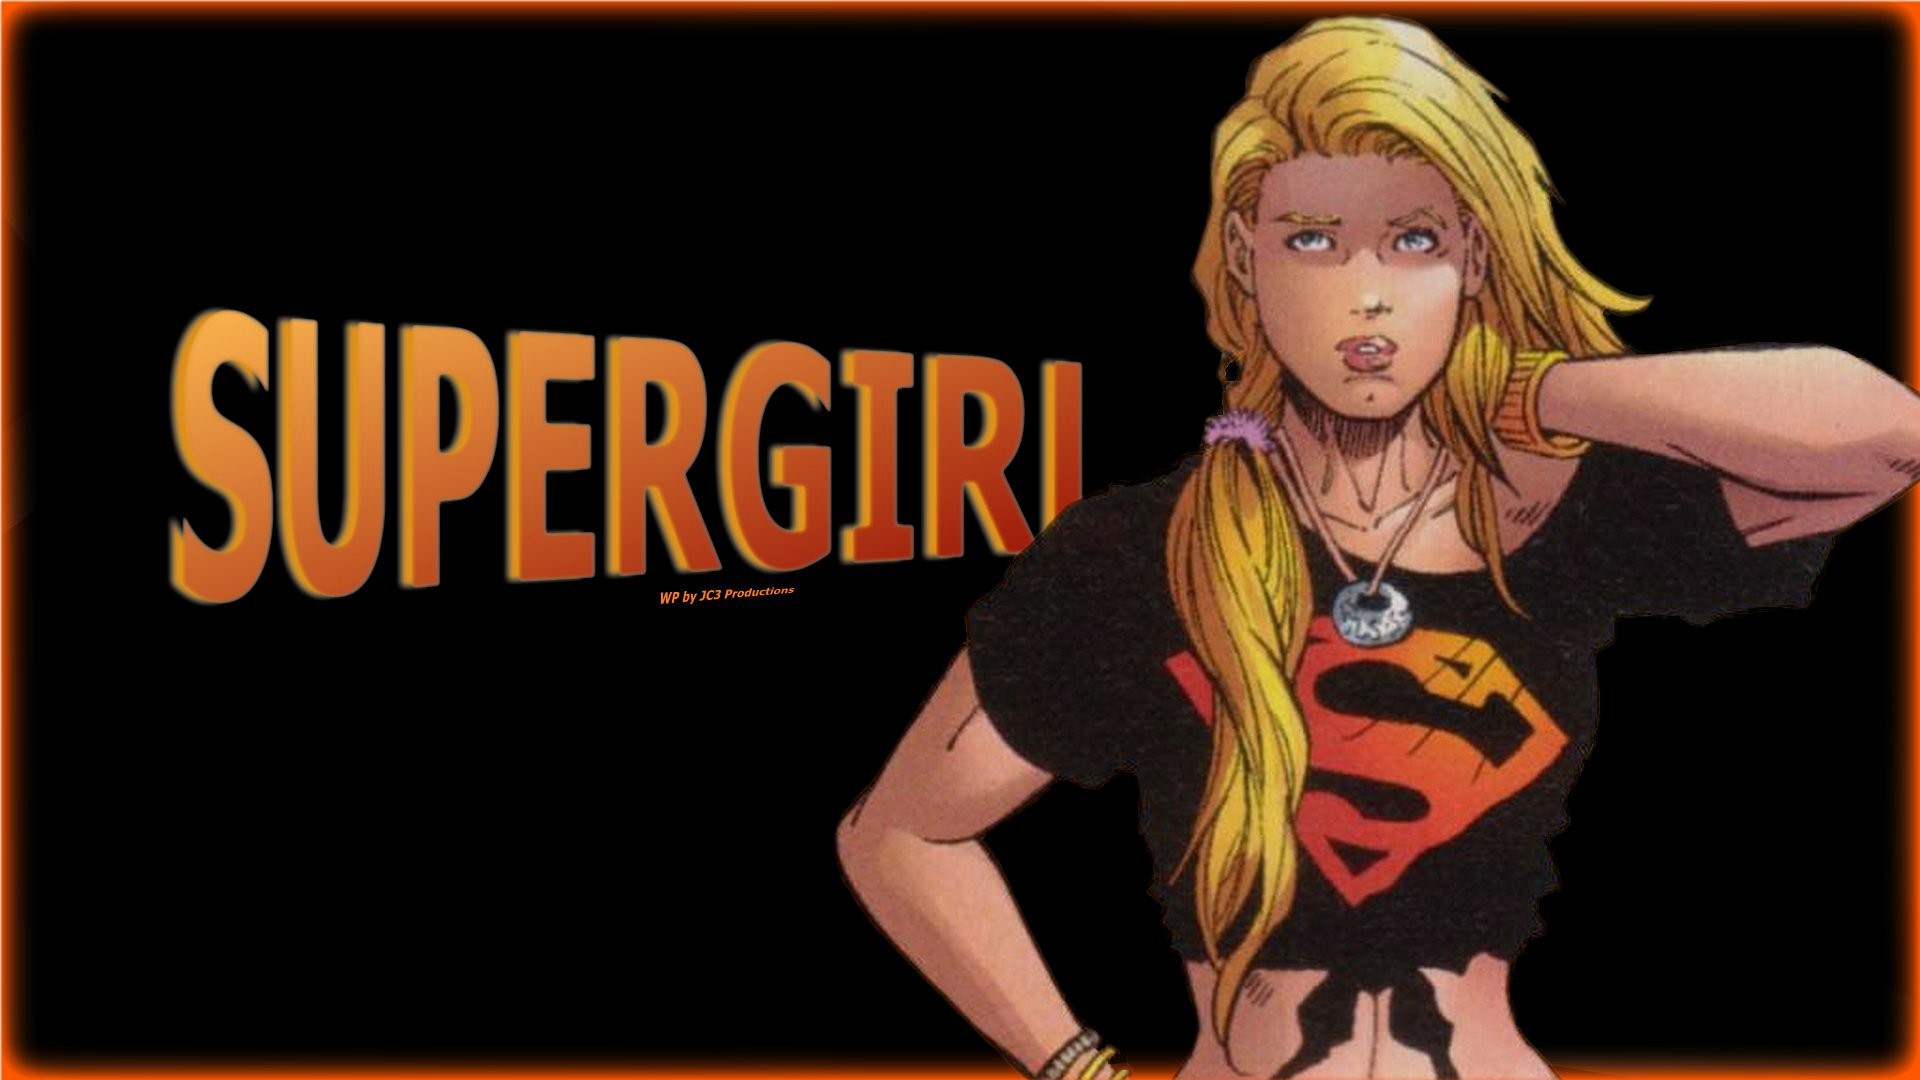 1920x1080 dc comics images Supergirl Teenager 2 HD wallpaper and background photos